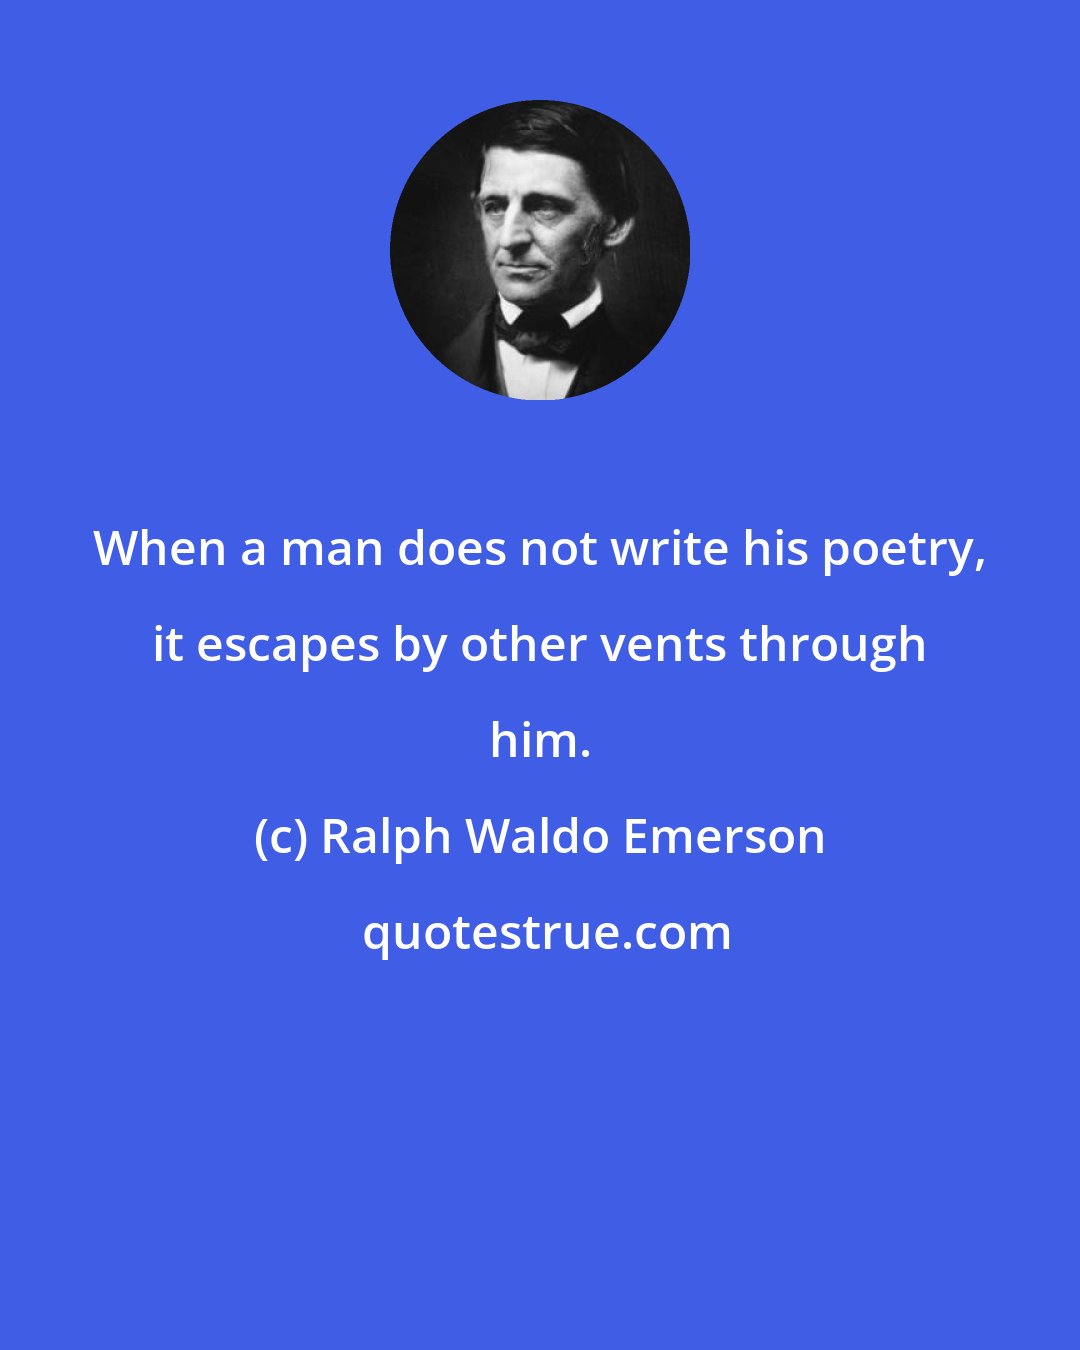 Ralph Waldo Emerson: When a man does not write his poetry, it escapes by other vents through him.